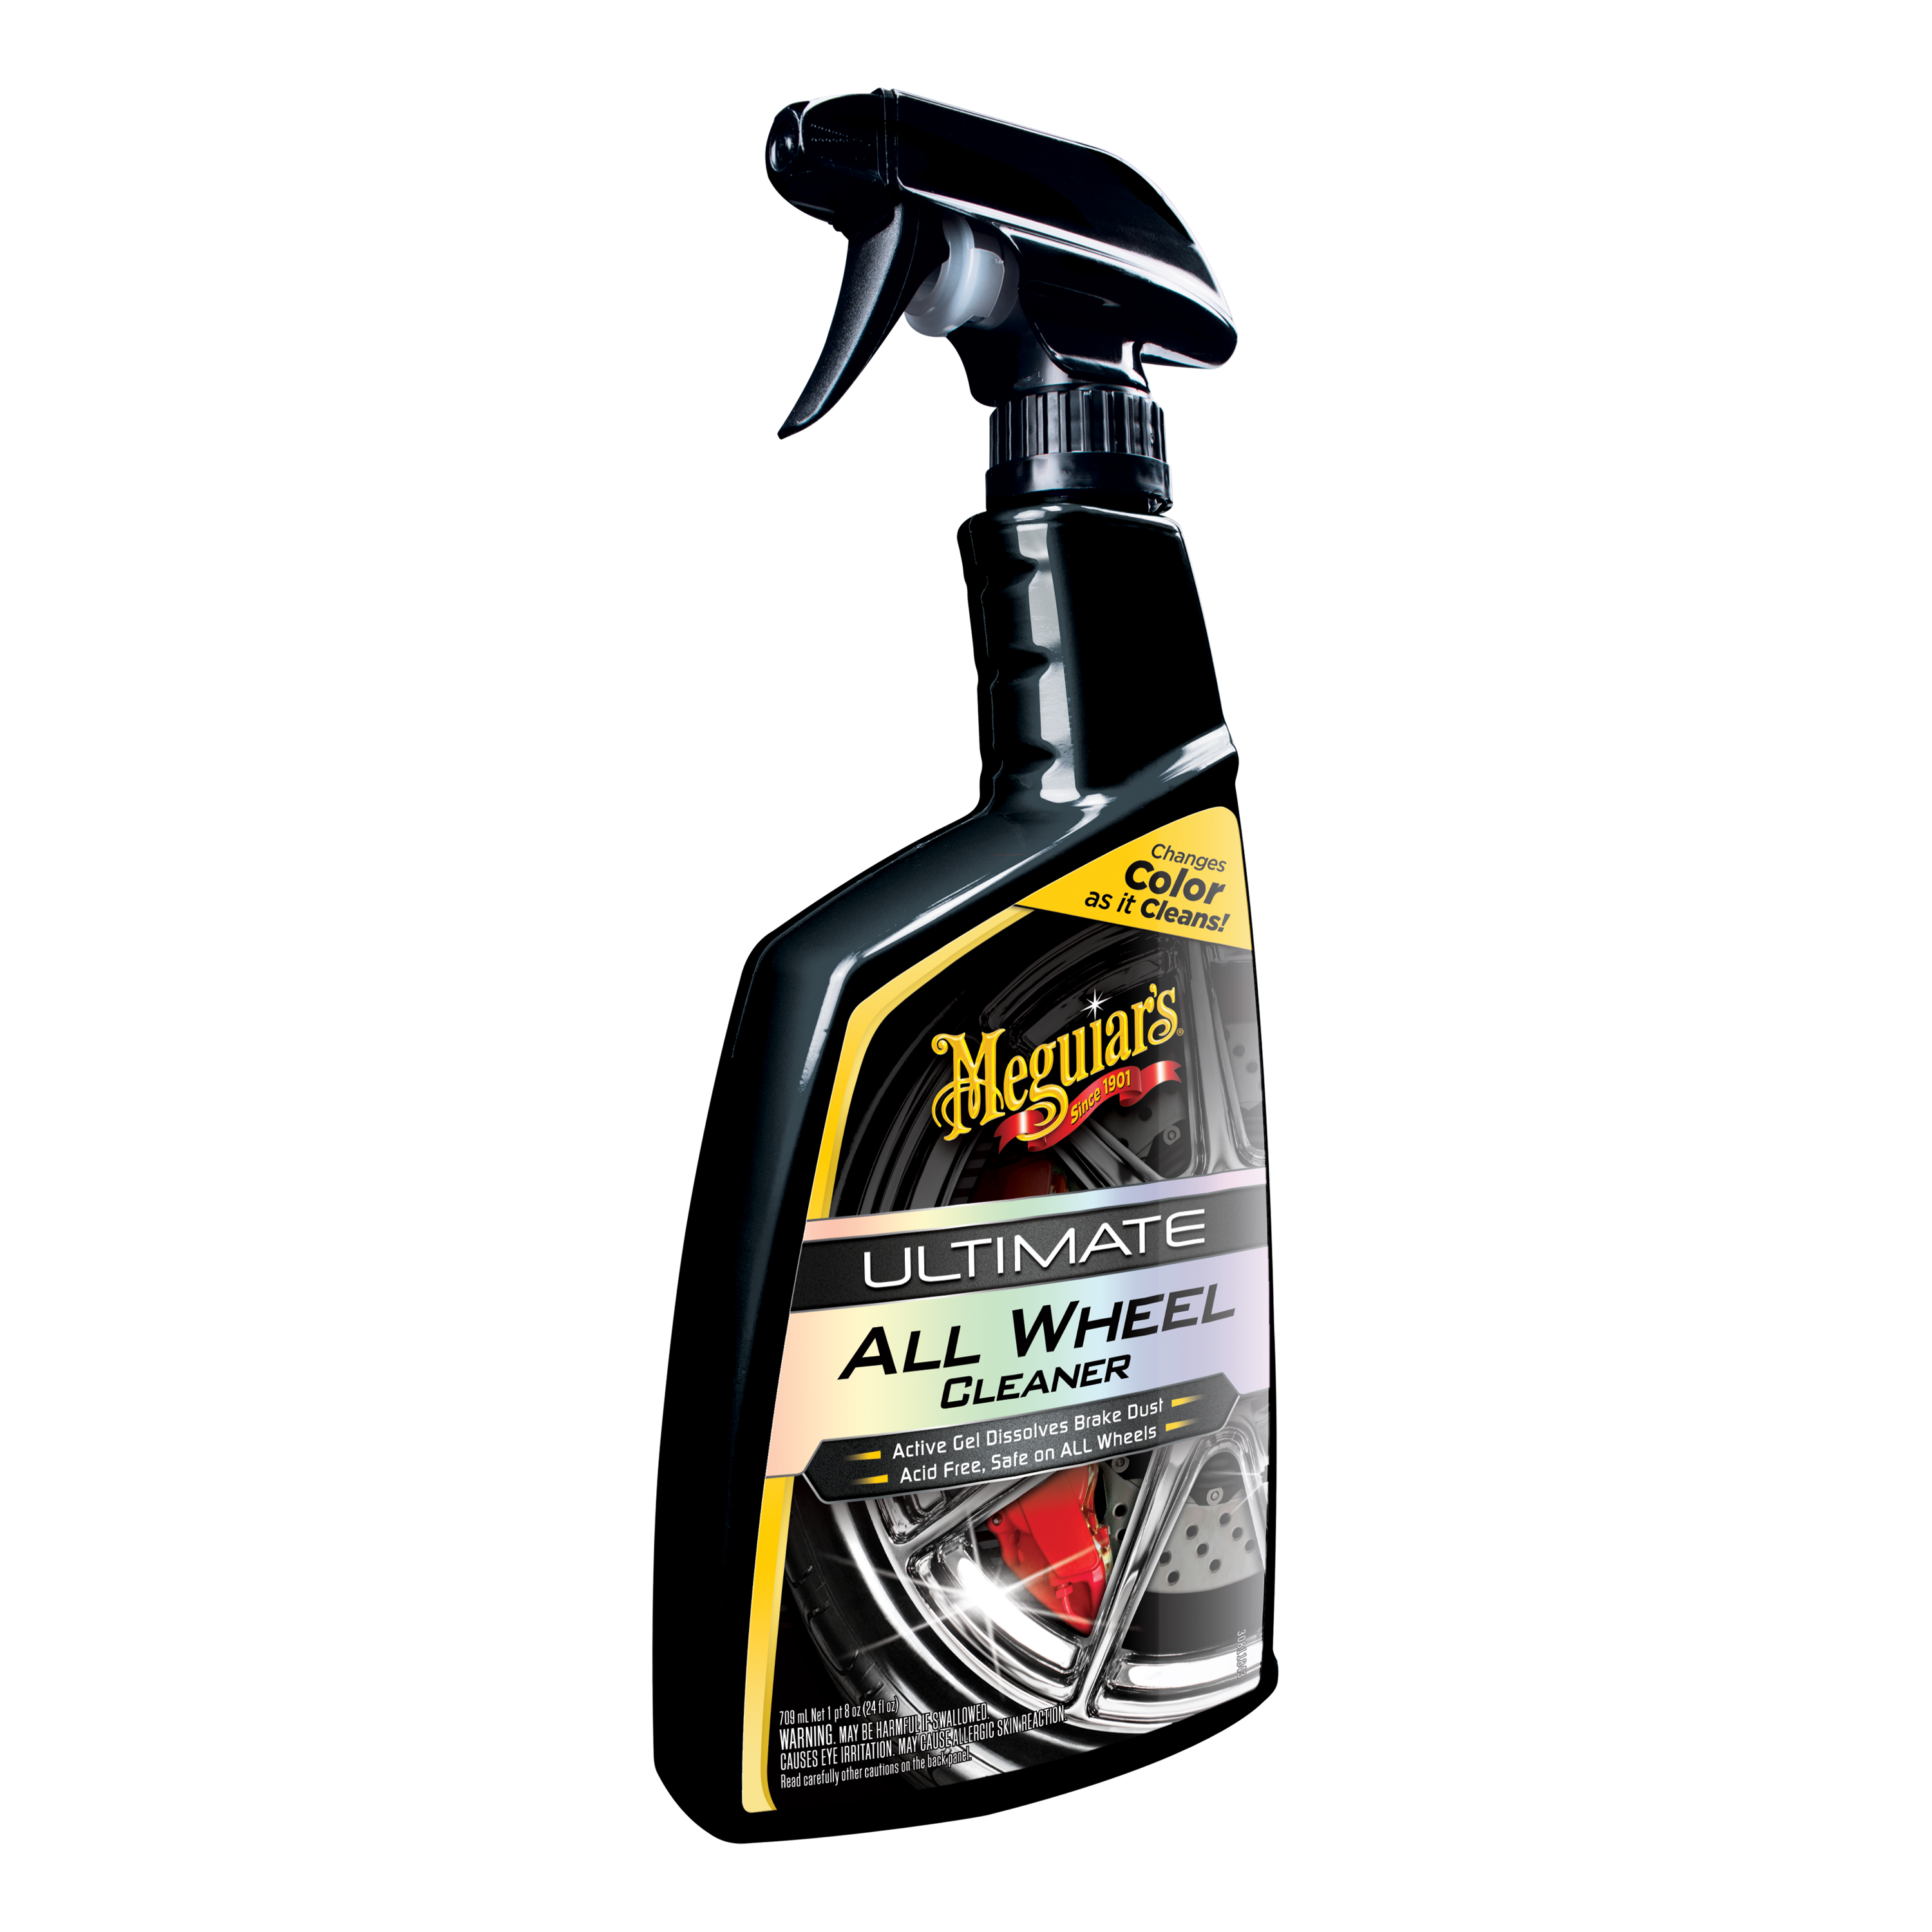 Wheel Cleaner Spray On Safe For All Rims | Greenway's Car Care